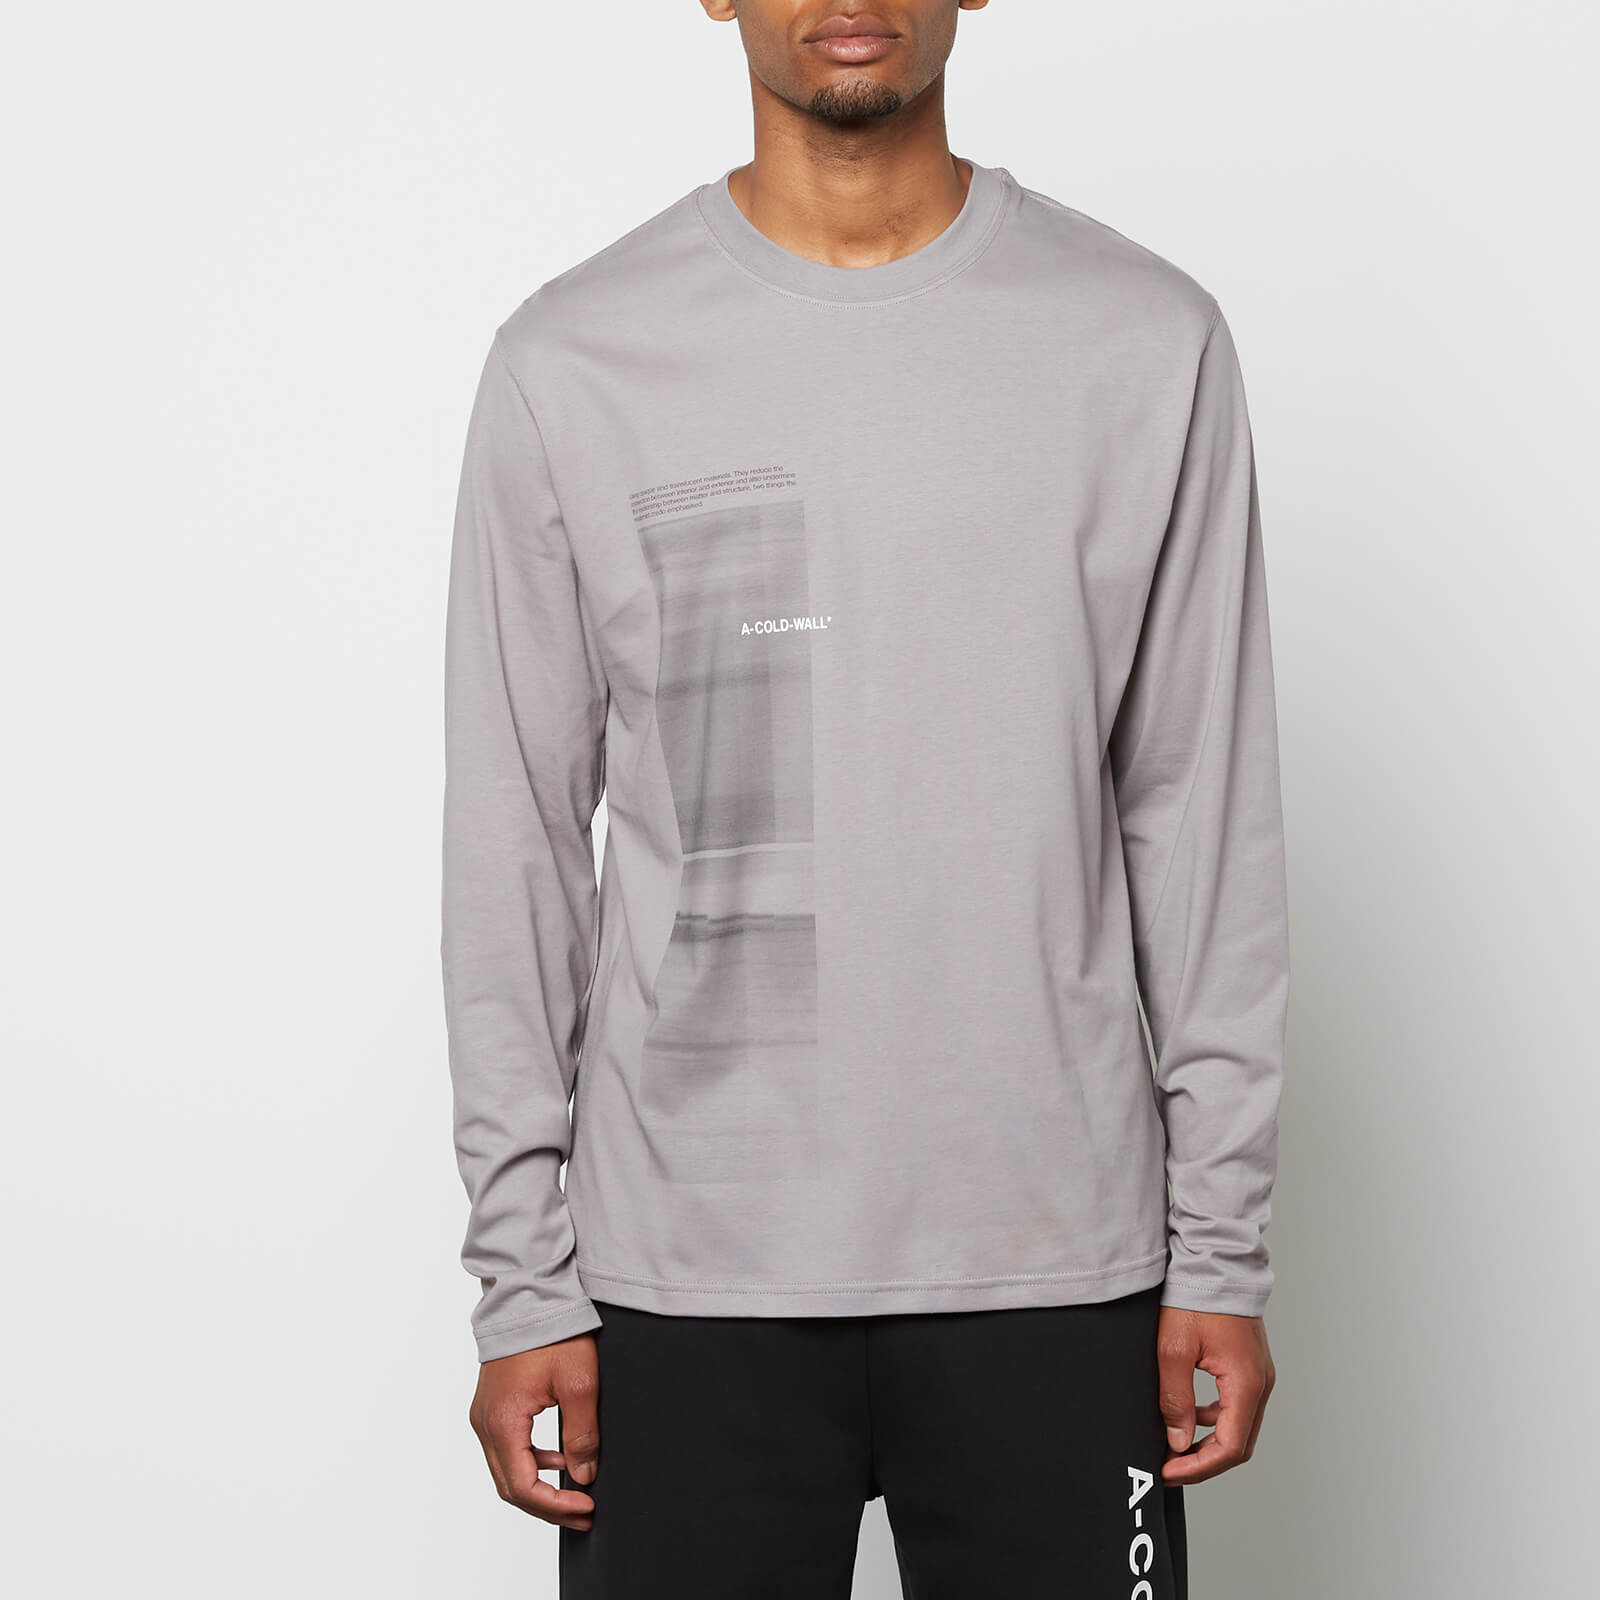 A-COLD-WALL* Men's Diffusion Graphic Long Sleeve T-Shirt - Mid Grey - S